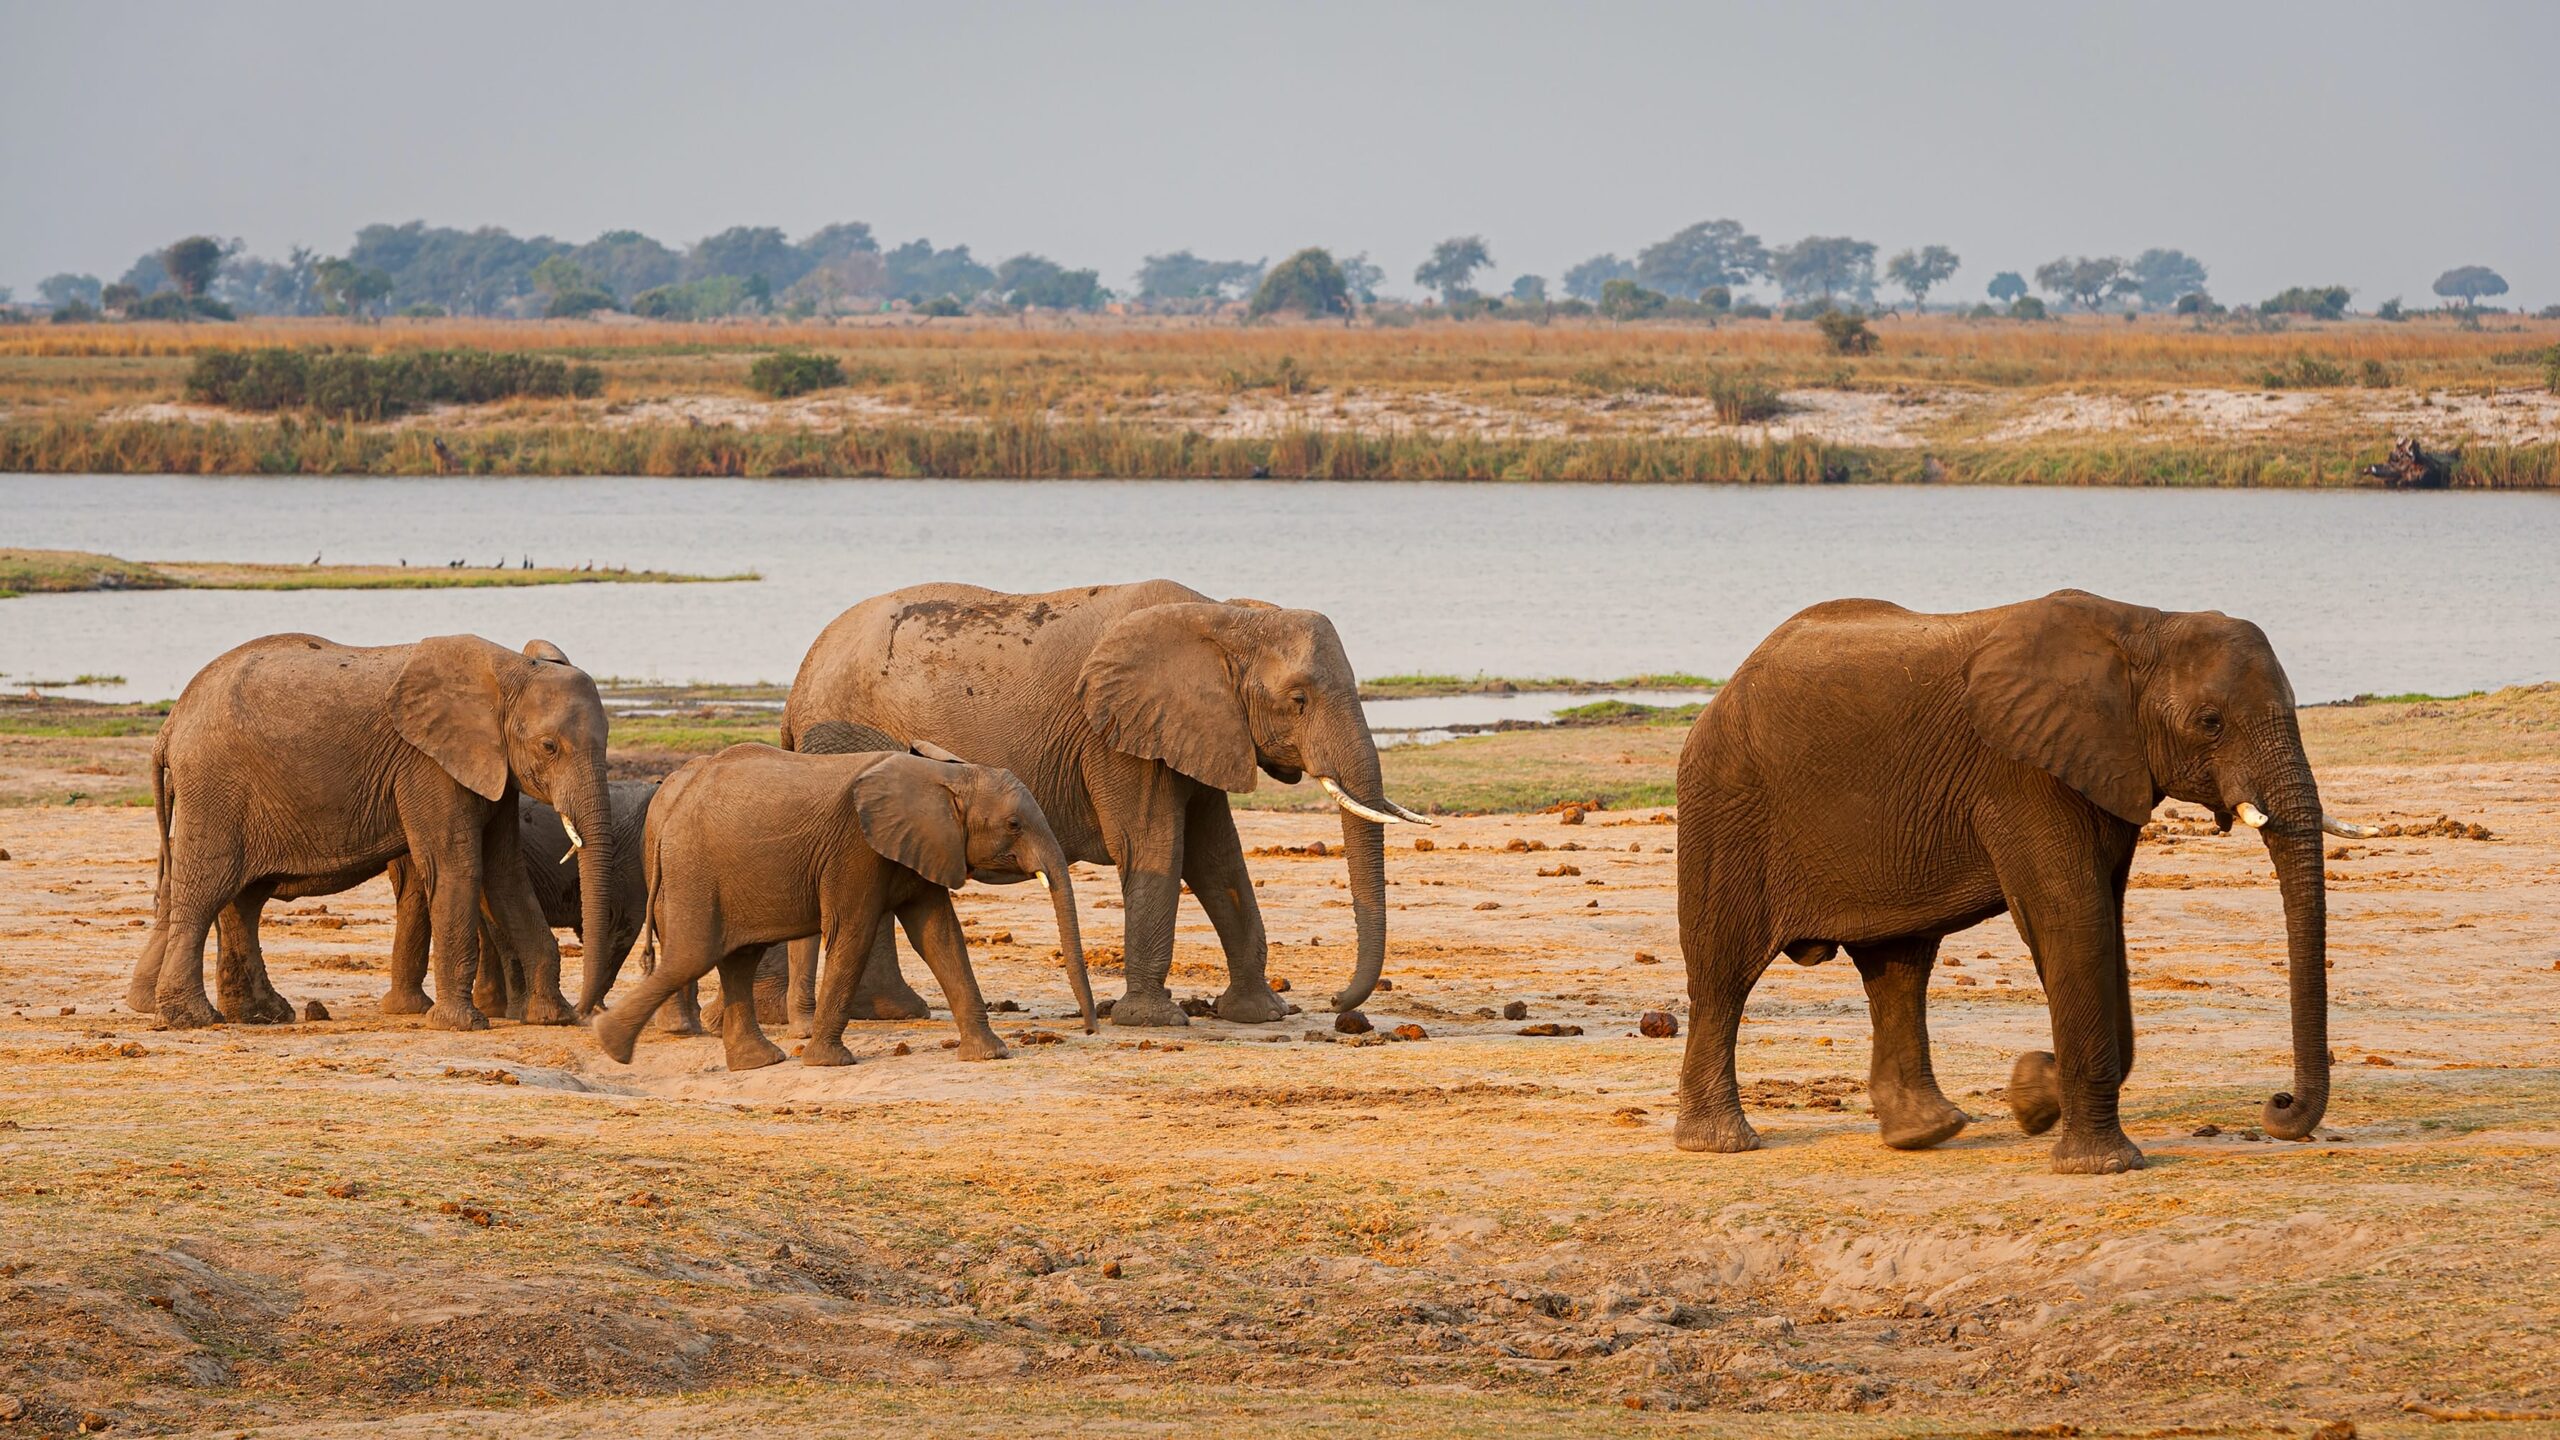 Small herd of Elephants in the Chobe National Park